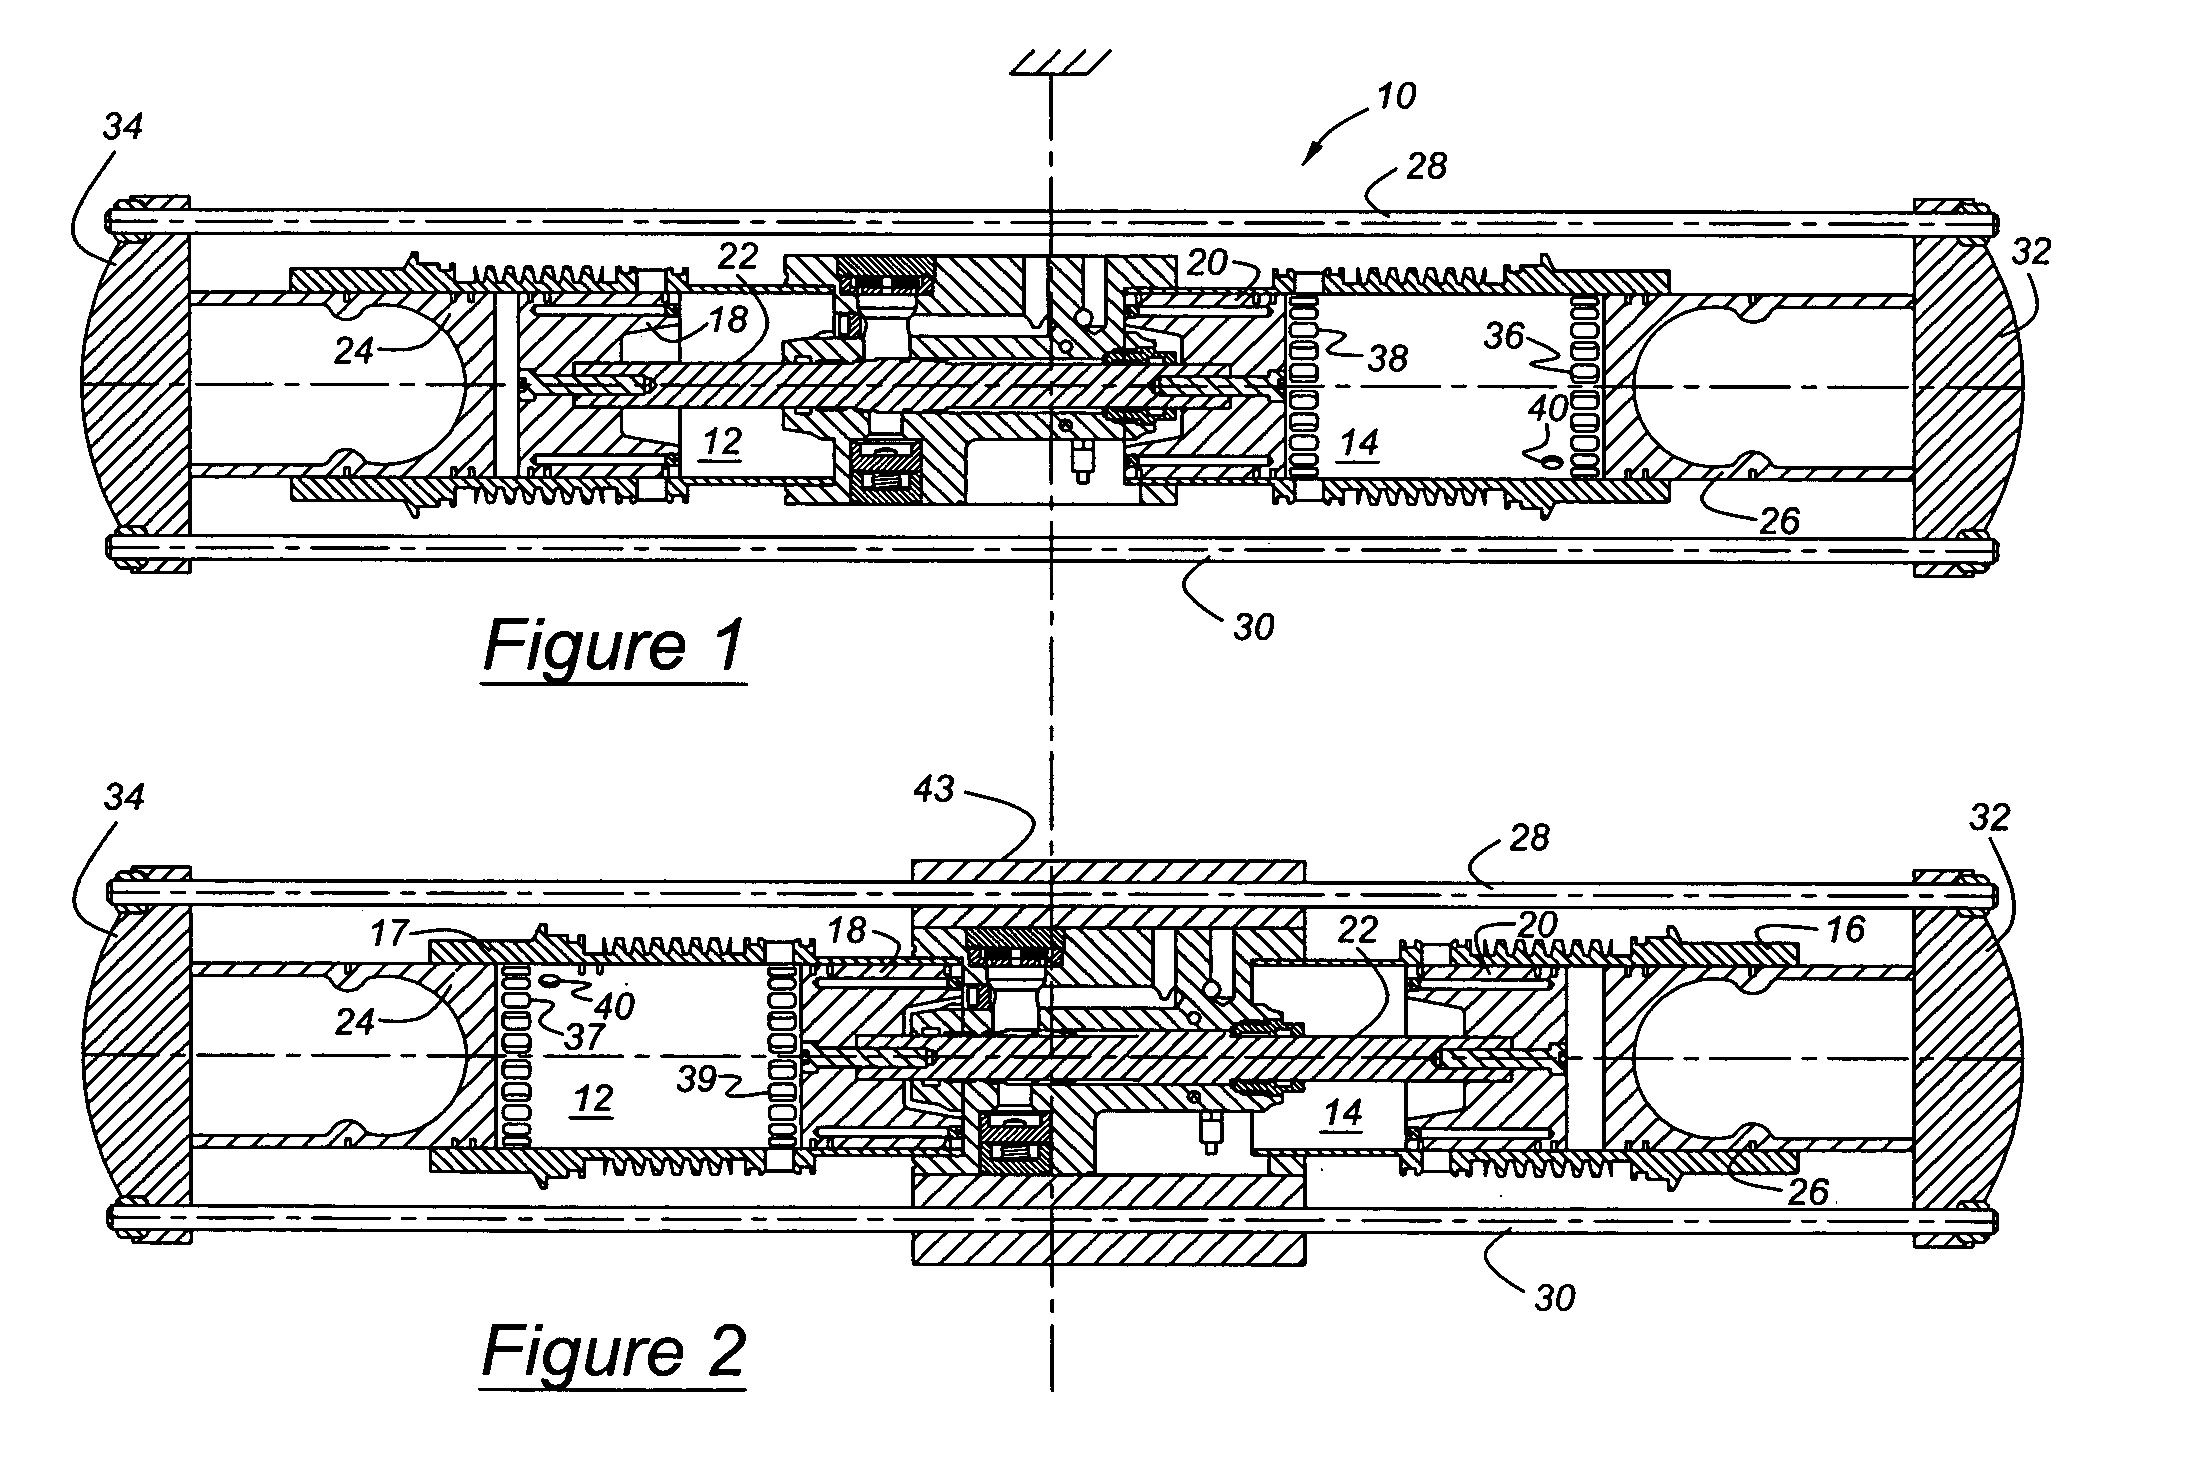 Electromagnetic servo valve strategy for controlling a free piston engine